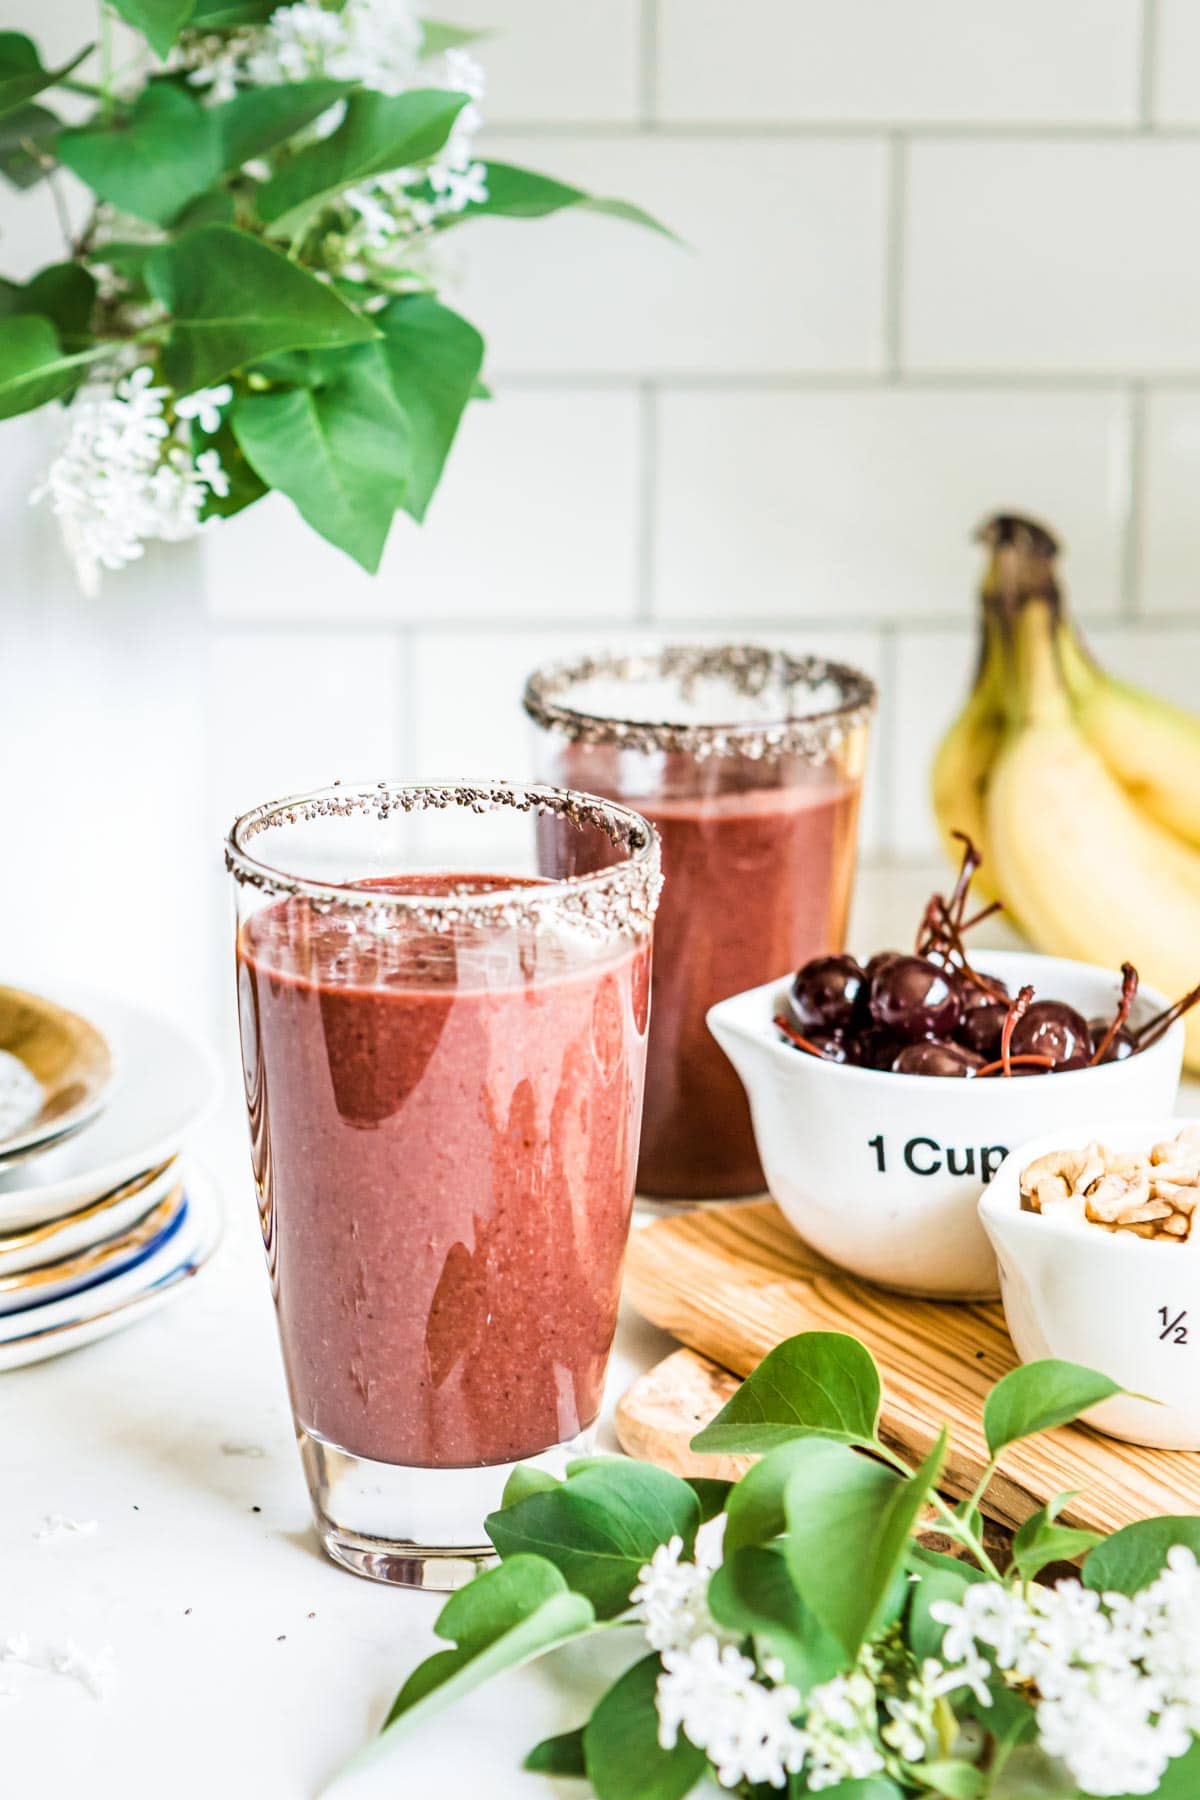 2 açai smoothies in glasses rimmed with chia seeds, next to bowls of cherries and cashews.